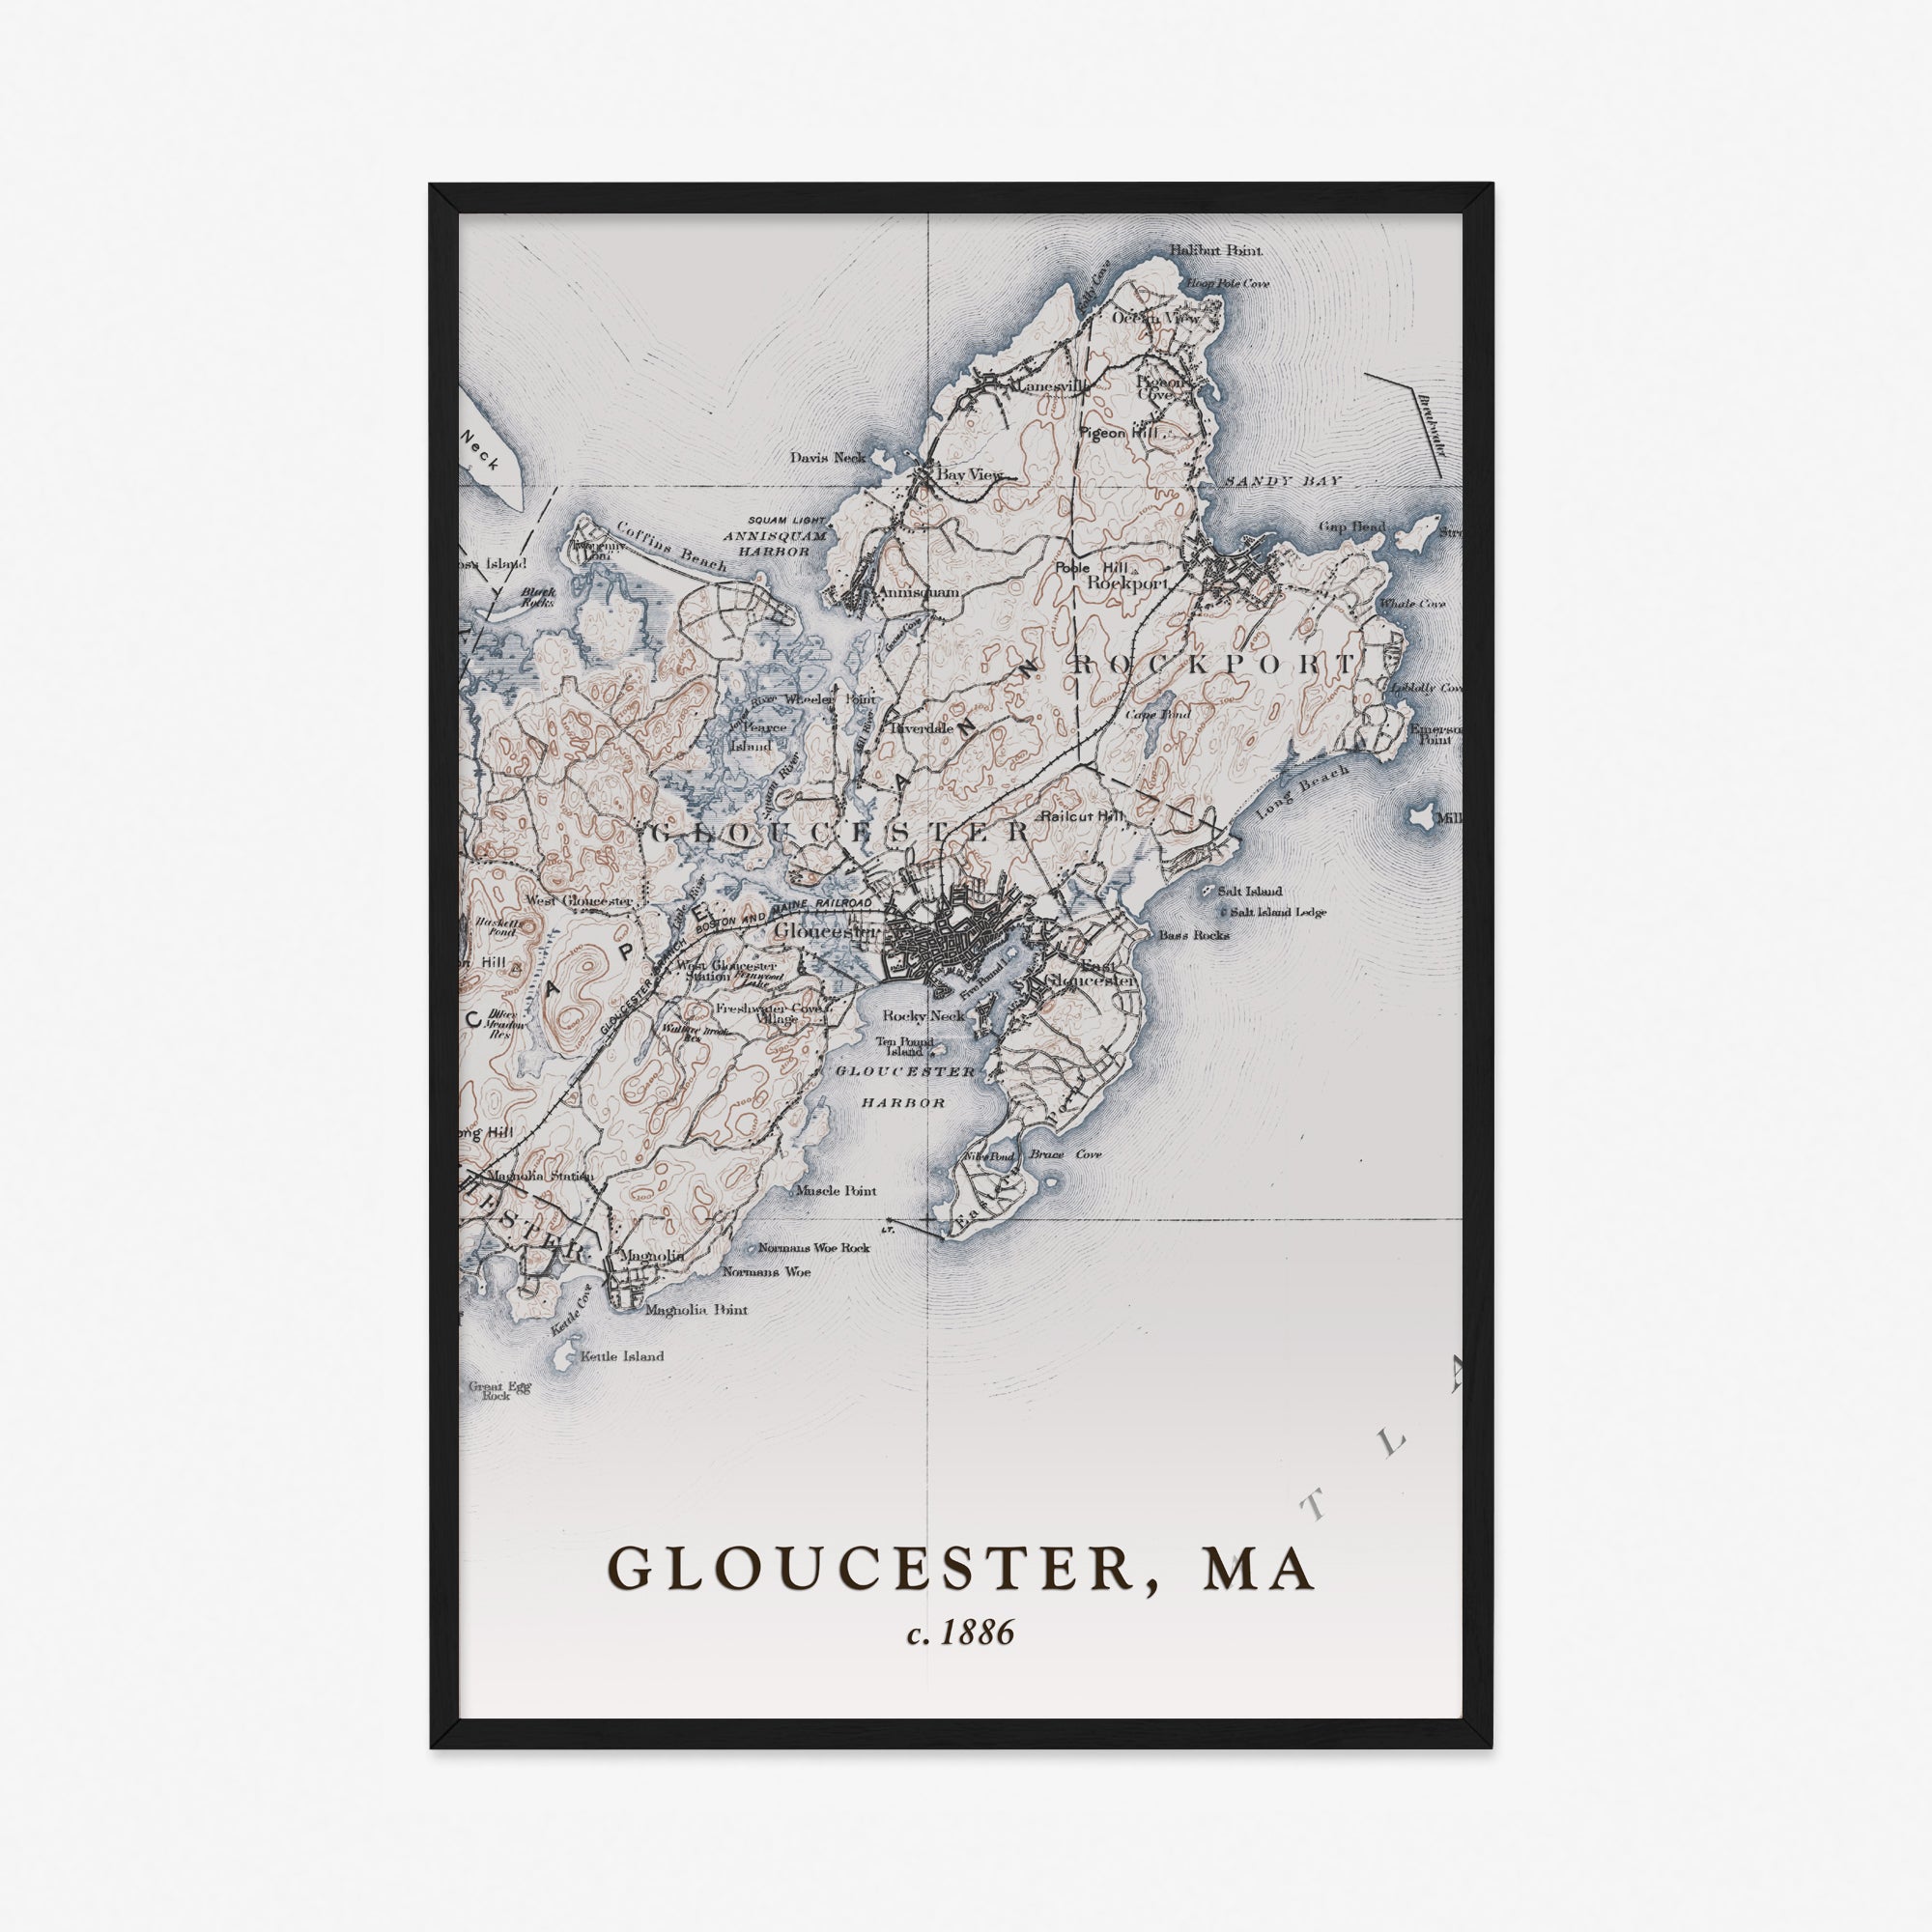 Gloucester, MA - 1886 Topographic Map